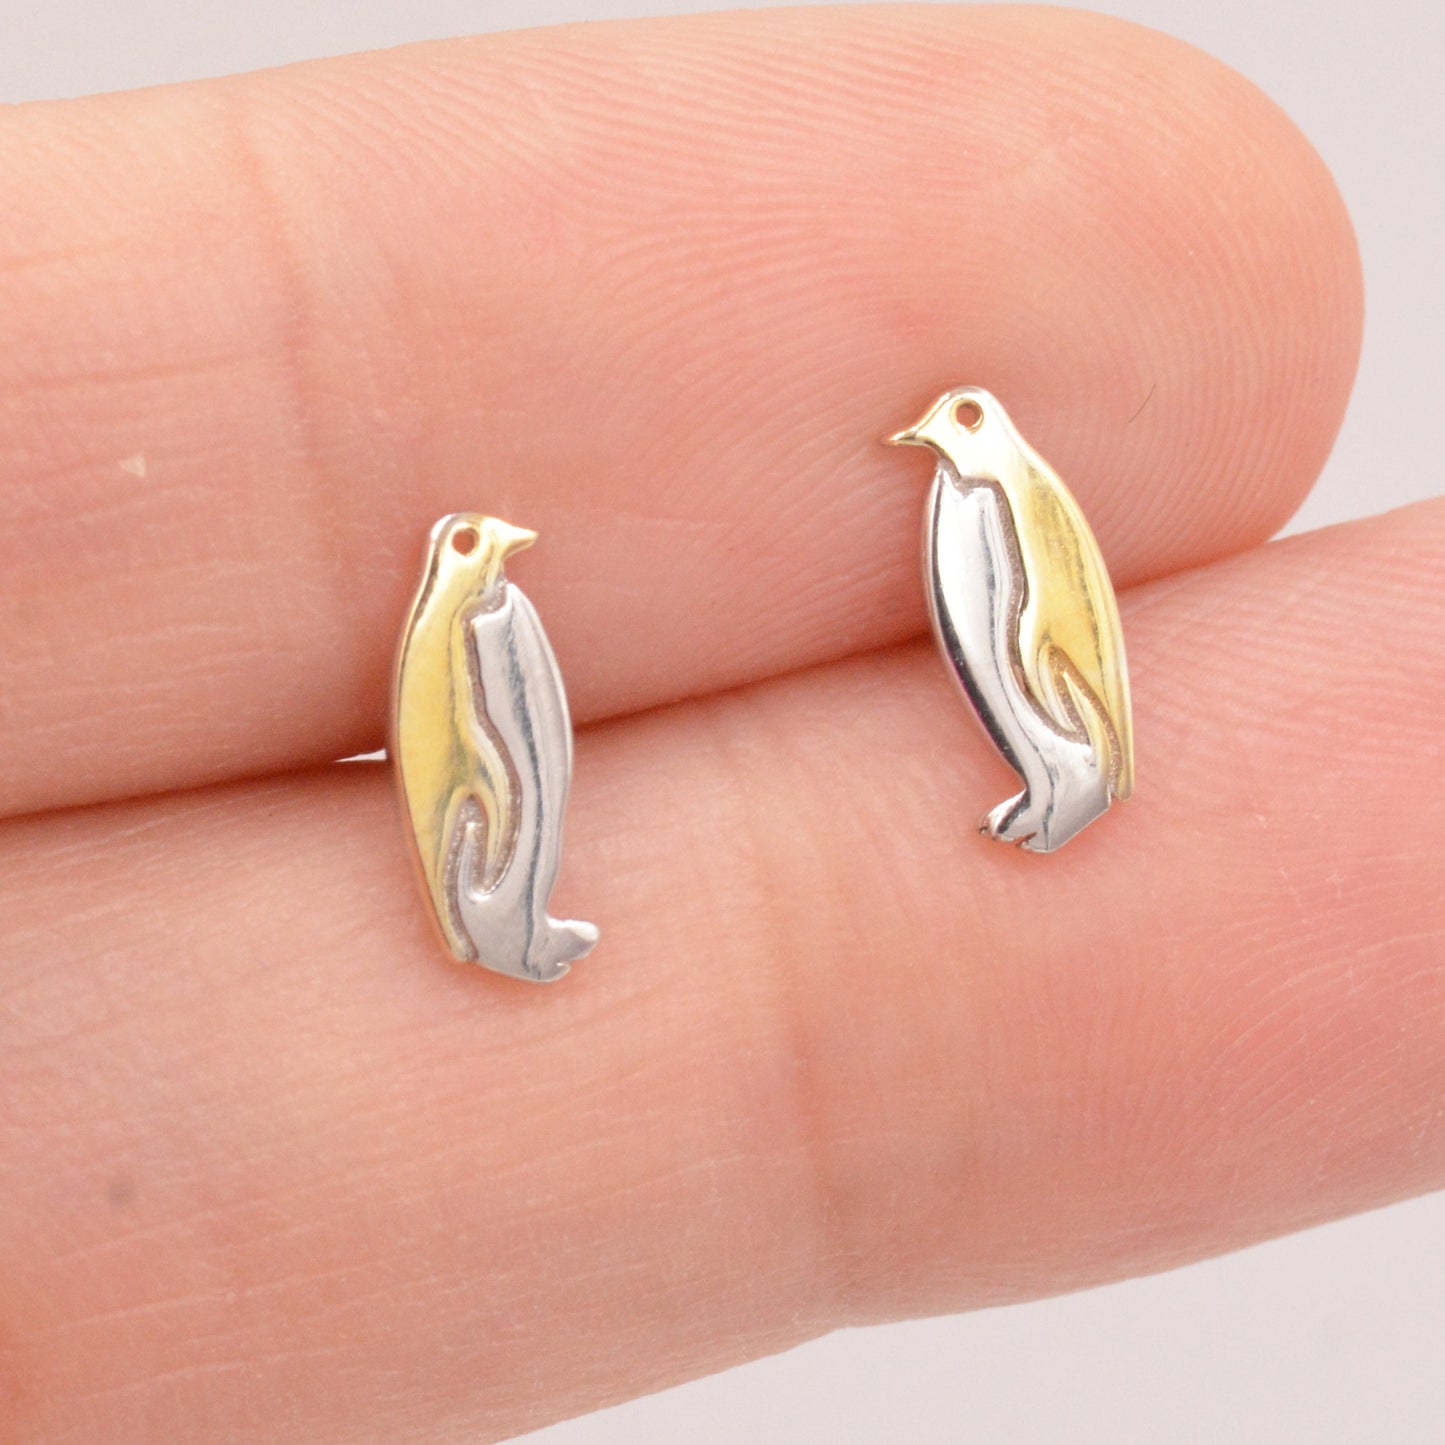 Penguin Stud Earrings in Sterling Silver - Small Pair of Penguin Bird Earrings - Gold and Silver Two Tone Plating - Cute Animal Stud